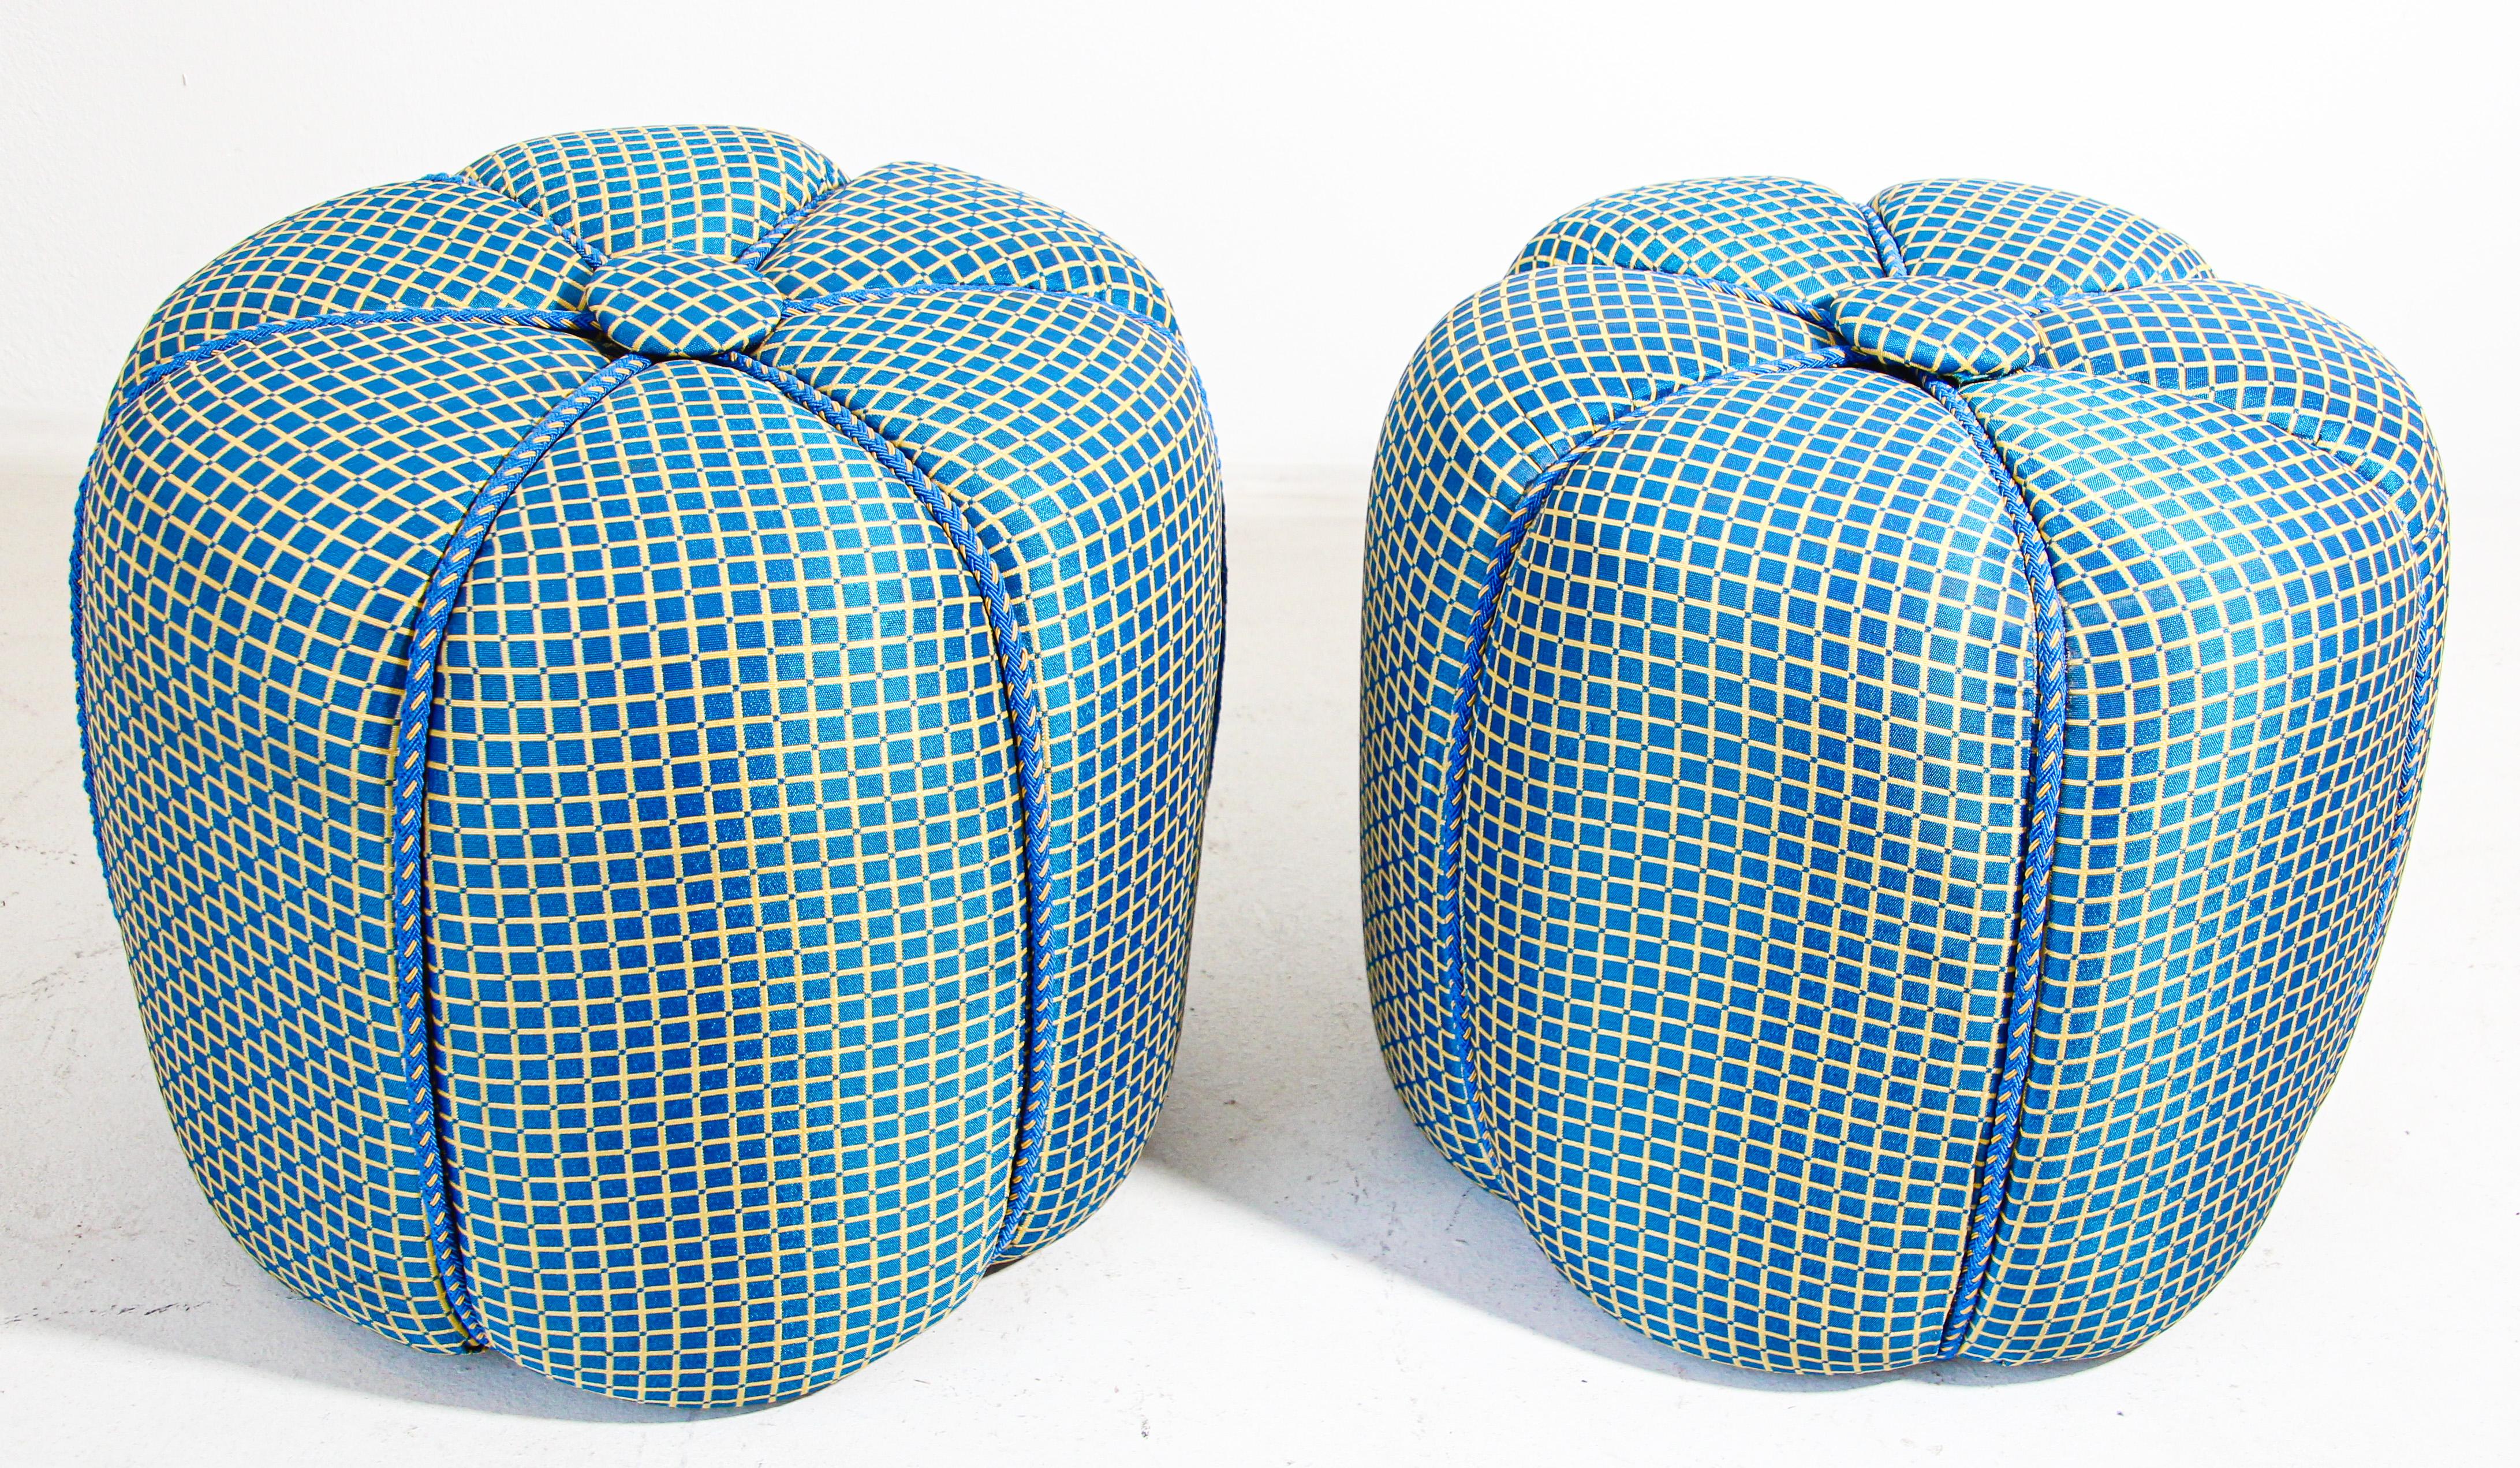 Pair of round Art Deco stools in Turquoise fabric upholstery.
Vintage Art Deco styel little pouf hassock, upholstered footstool circular ottoman.
This versatile accent piece, pouf is designed primarily for seating but can be used as both seating and